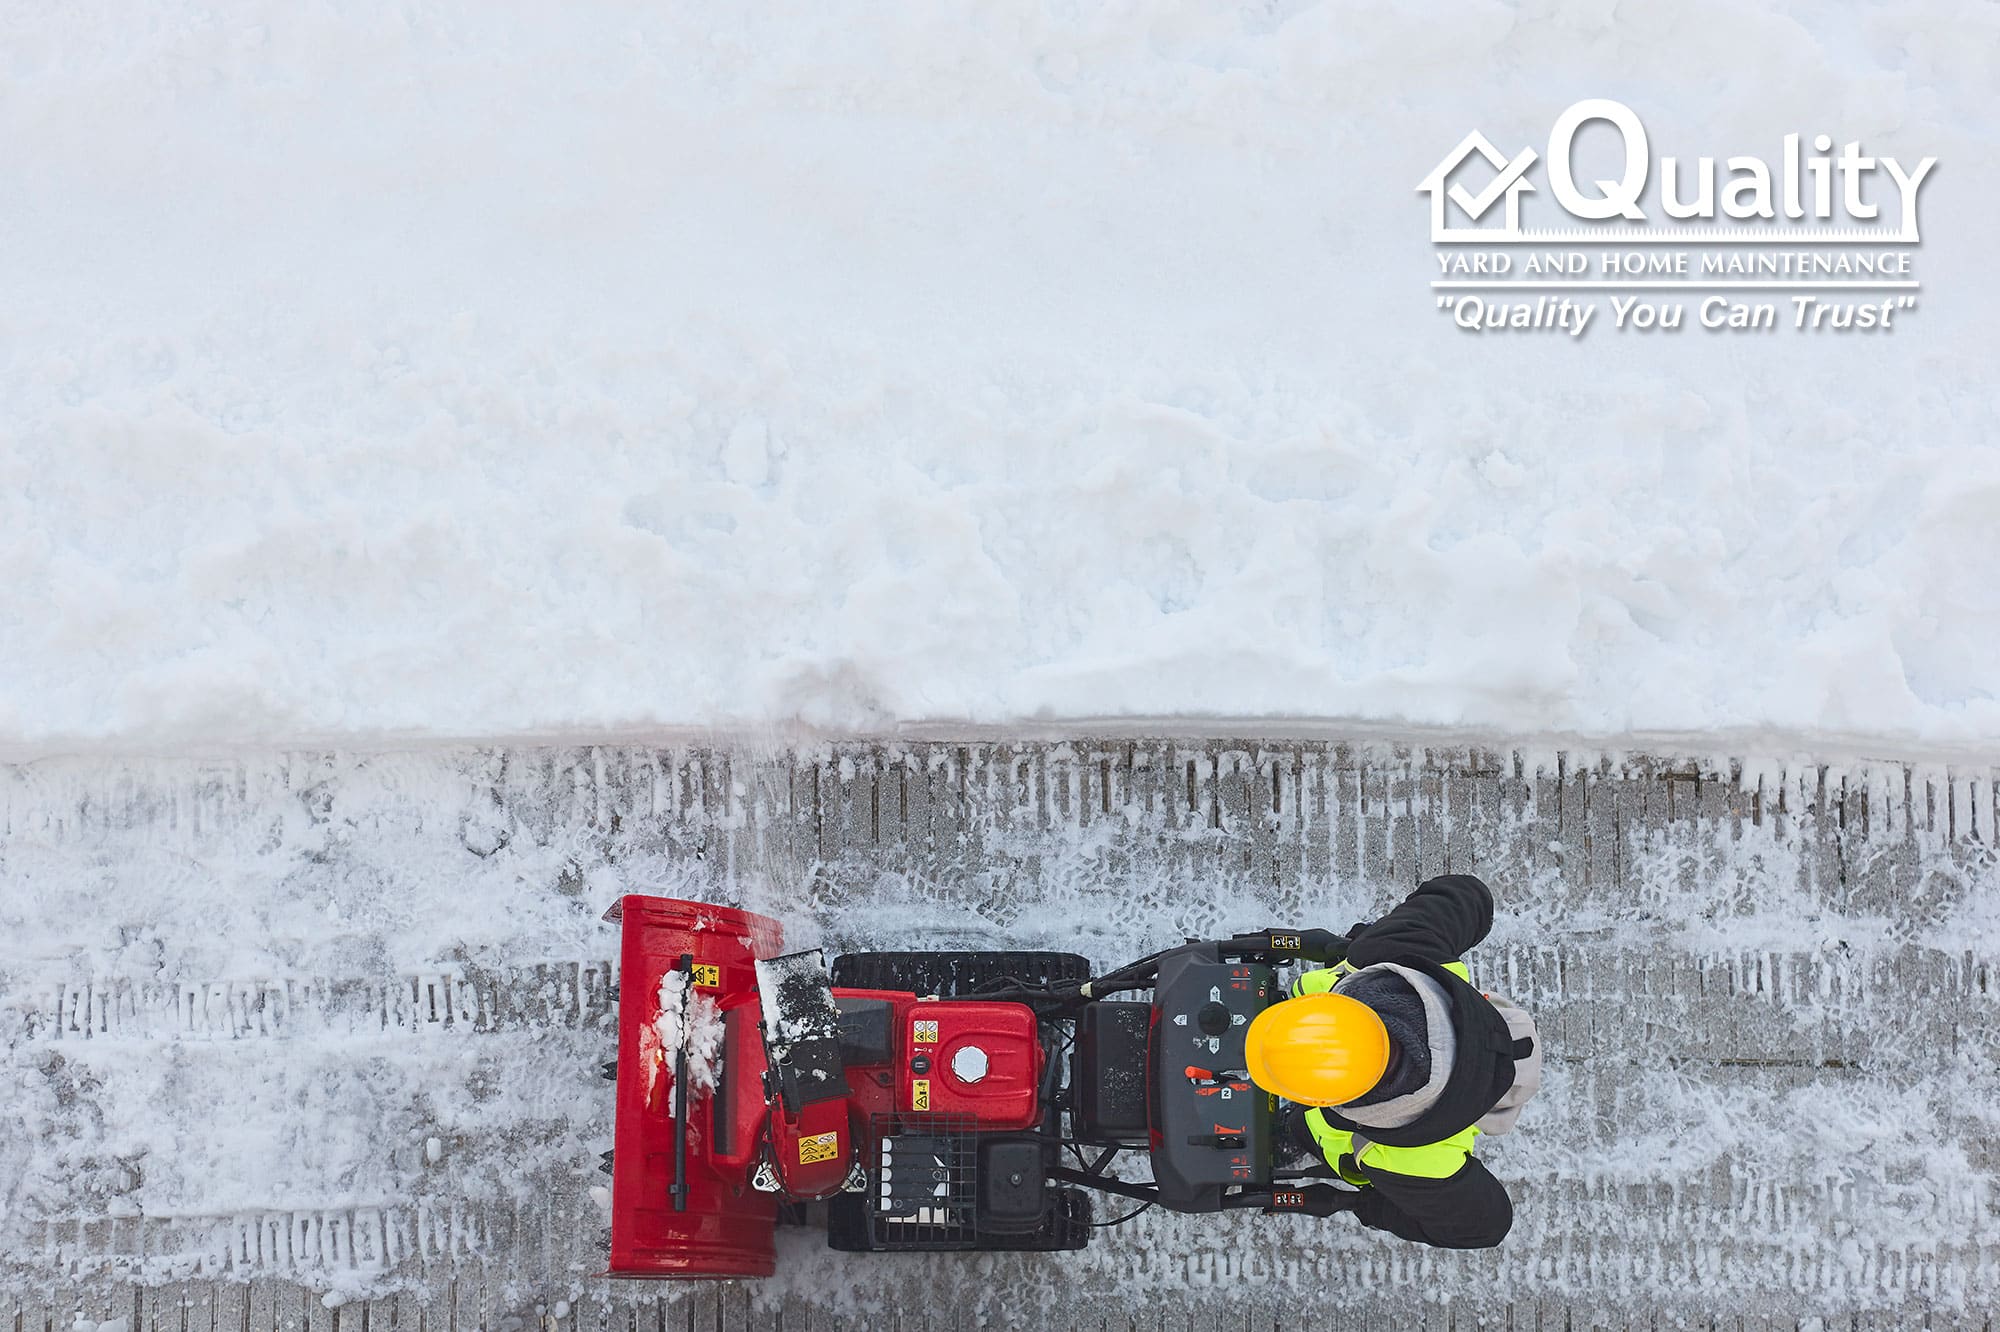 Snow blowing service, best in central ohio